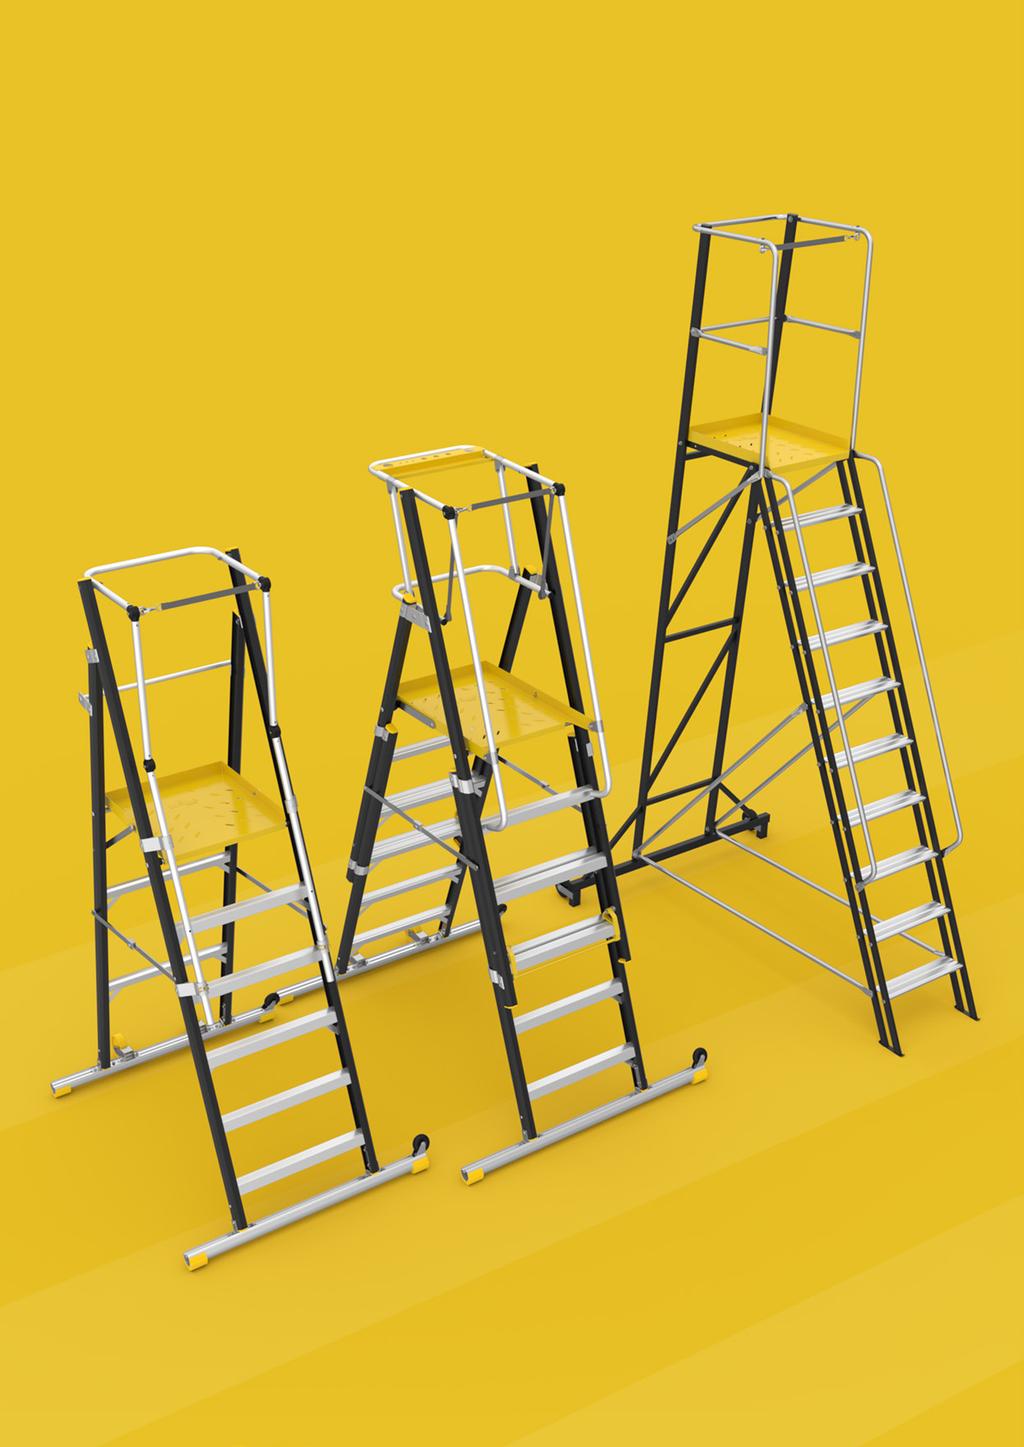 APPROVED Approved according to the new European standard for work platforms.